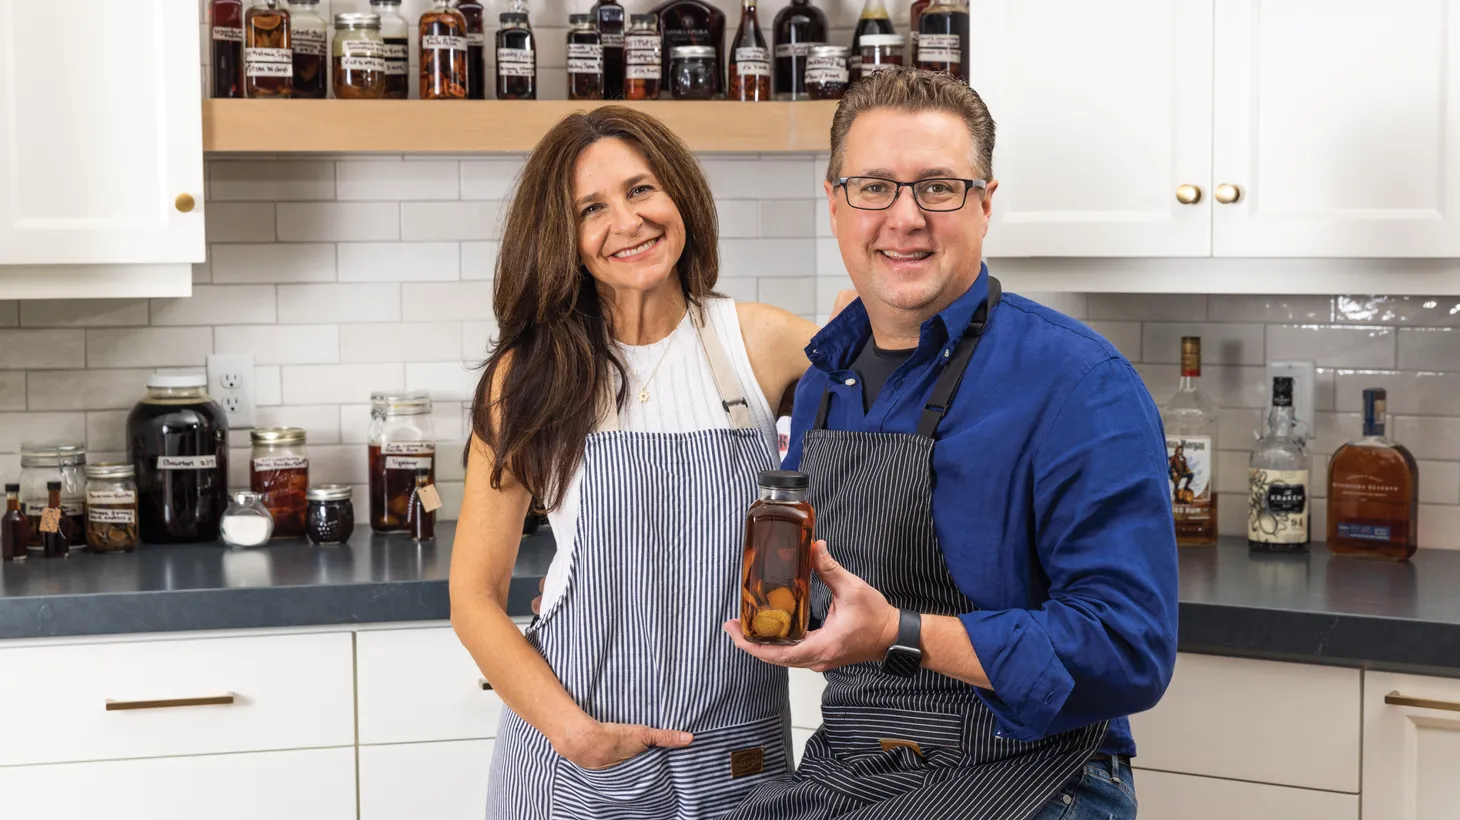 Jill and Paul Fulton started experimenting with making extracts during gift-giving season.